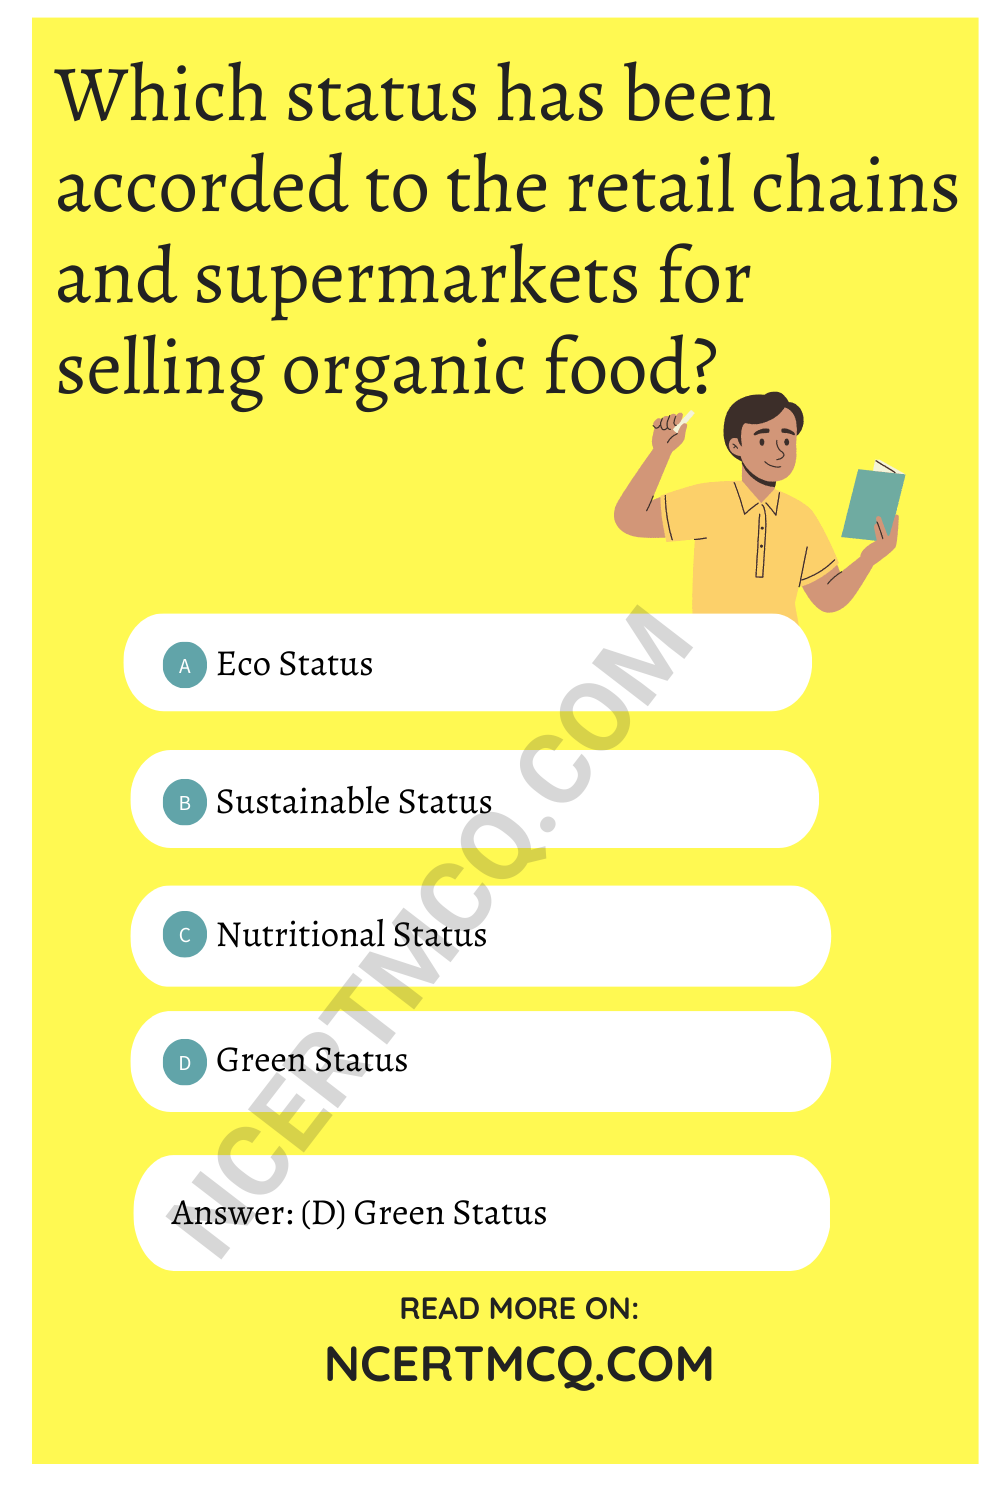 Which status has been accorded to the retail chains and supermarkets for selling organic food?